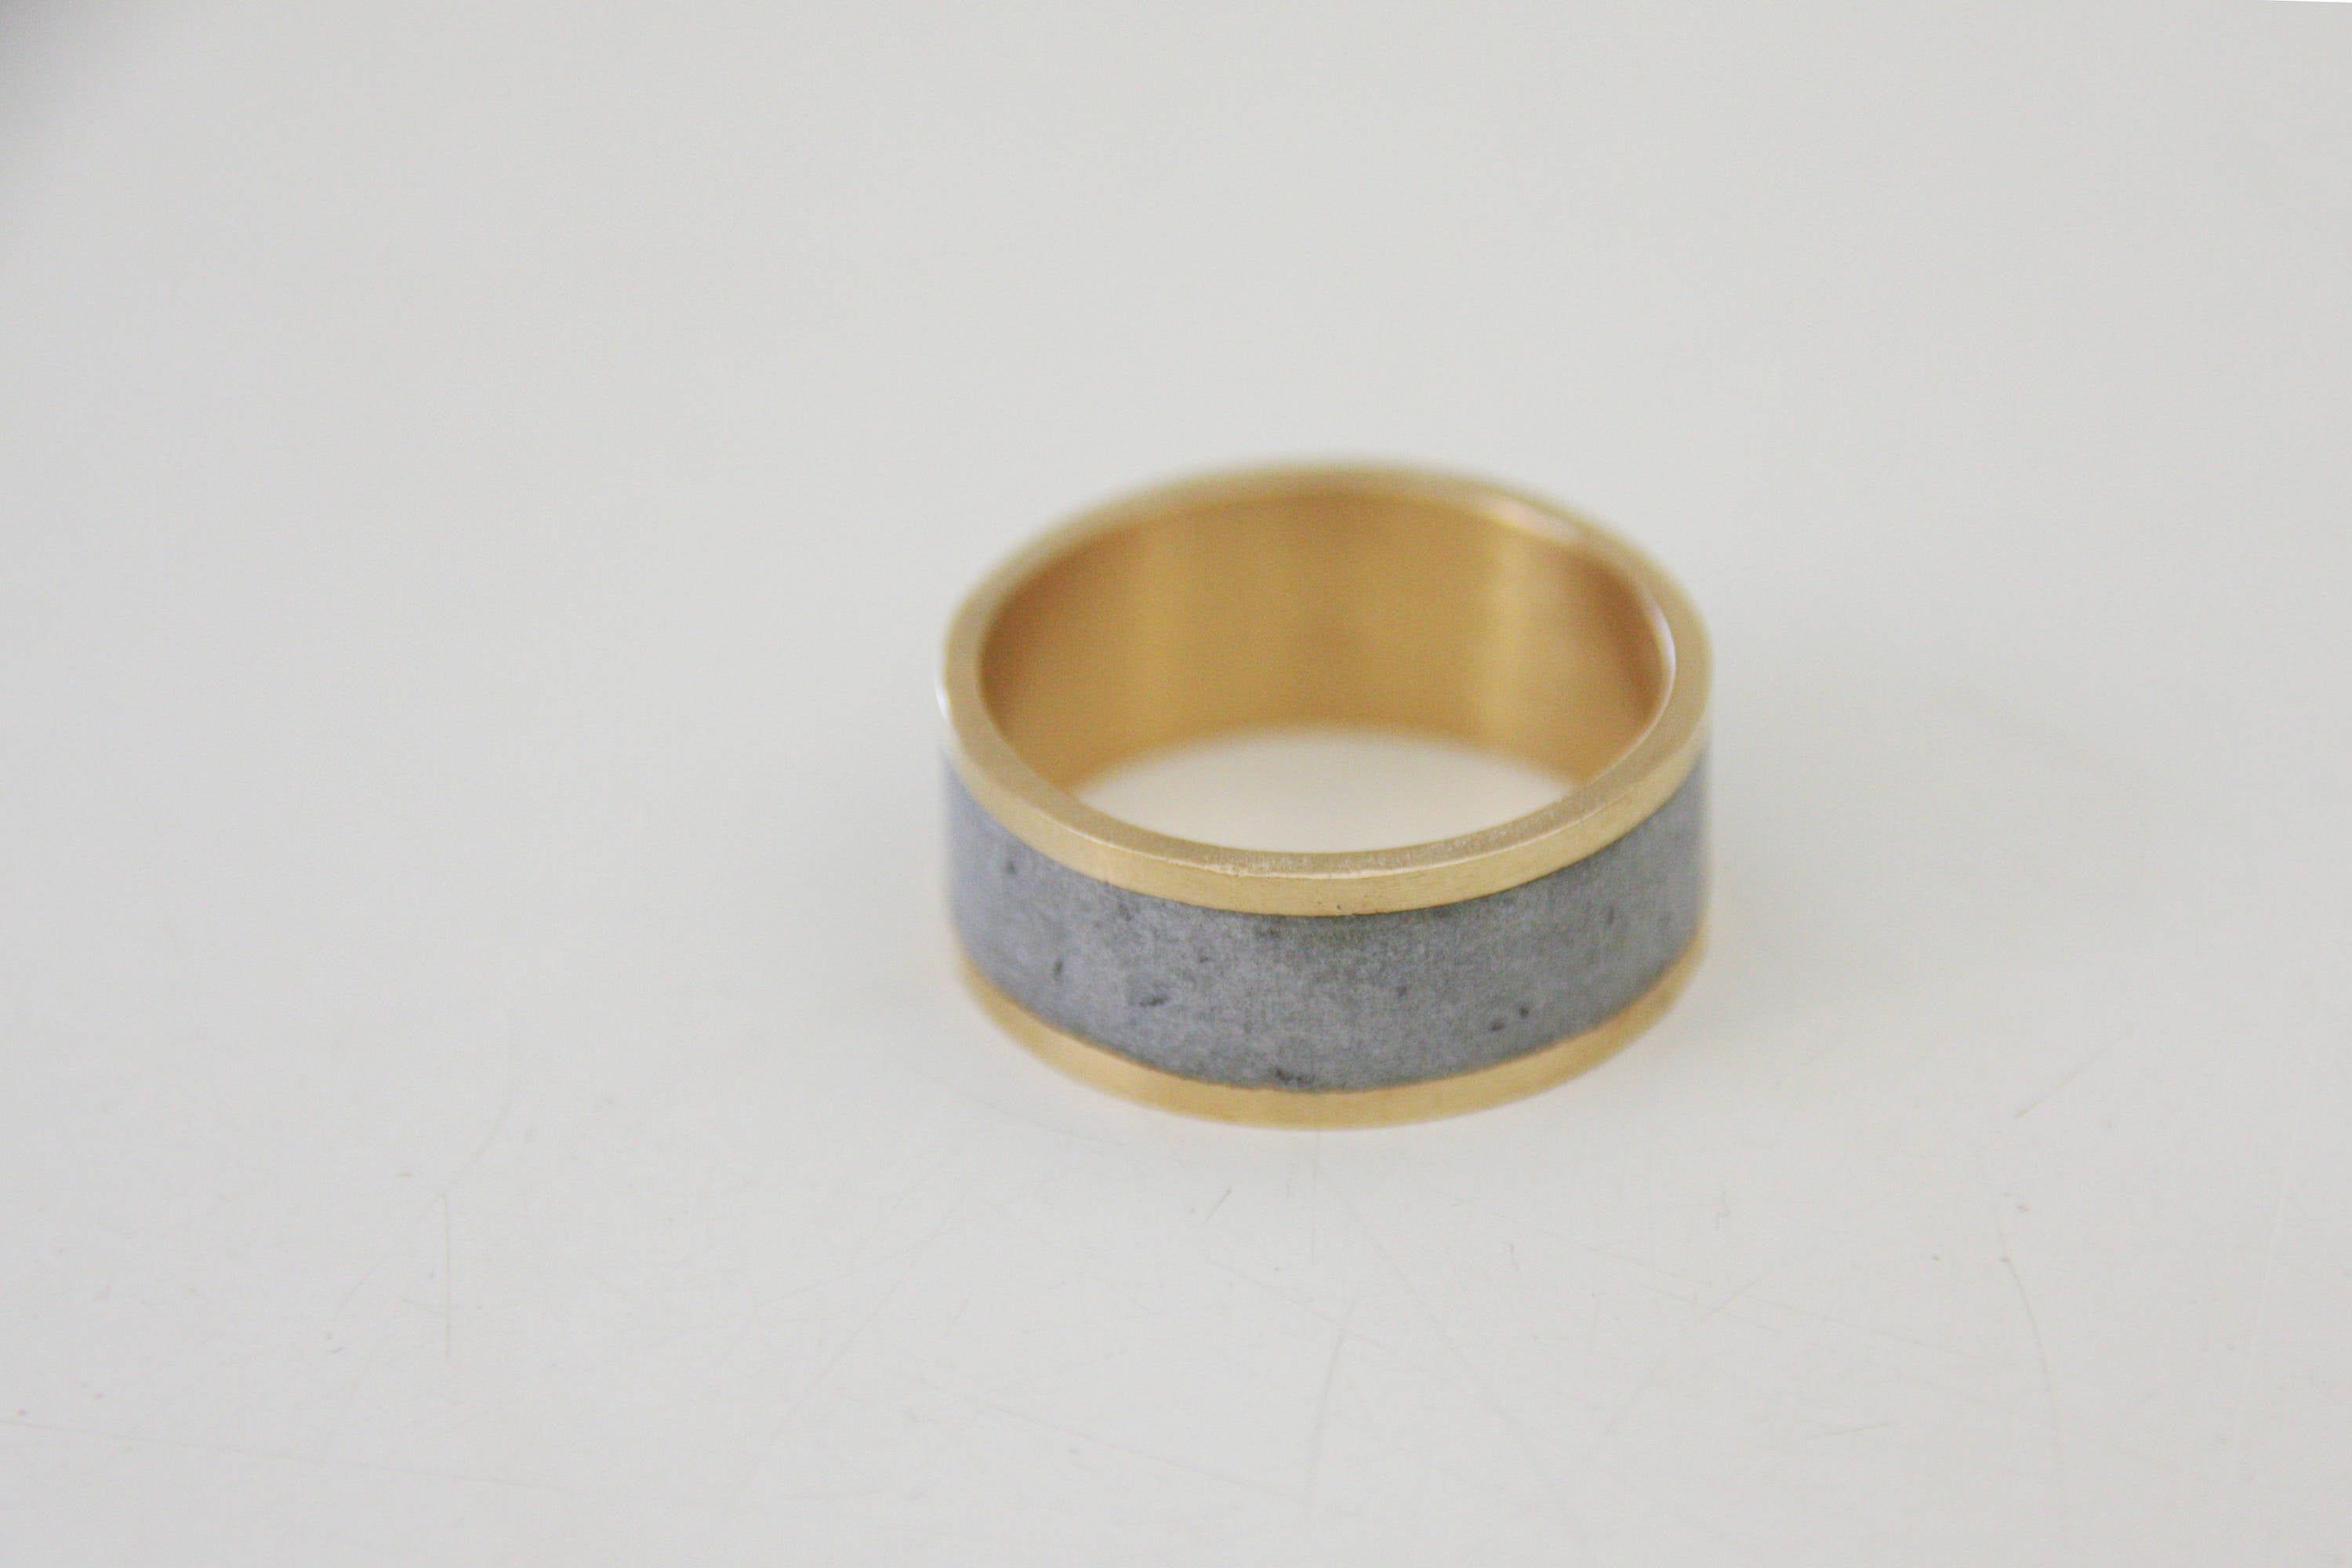 wedding band set, Couples Ring, wedding ring, unisex ring, concrete bands, Minimalist gold Ring, Contemporary ring, modern ring, unique ring - hs